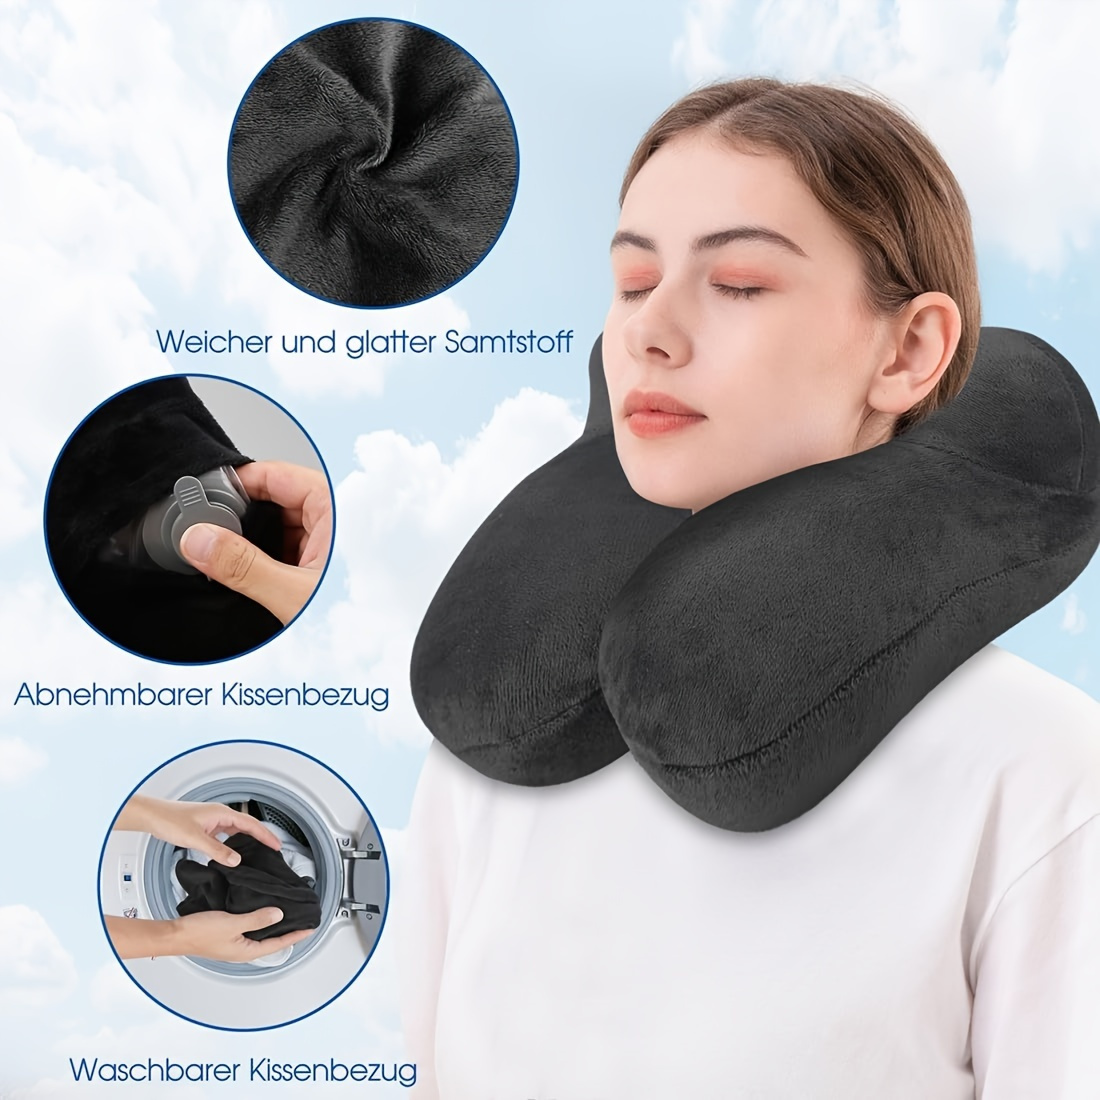 

Ergonomic Inflatable Travel Pillow With Earplugs - Soft Velvet, Adjustable Neck Support For Airplane, Car, Office & Camping - Machine Washable, All-season Comfort